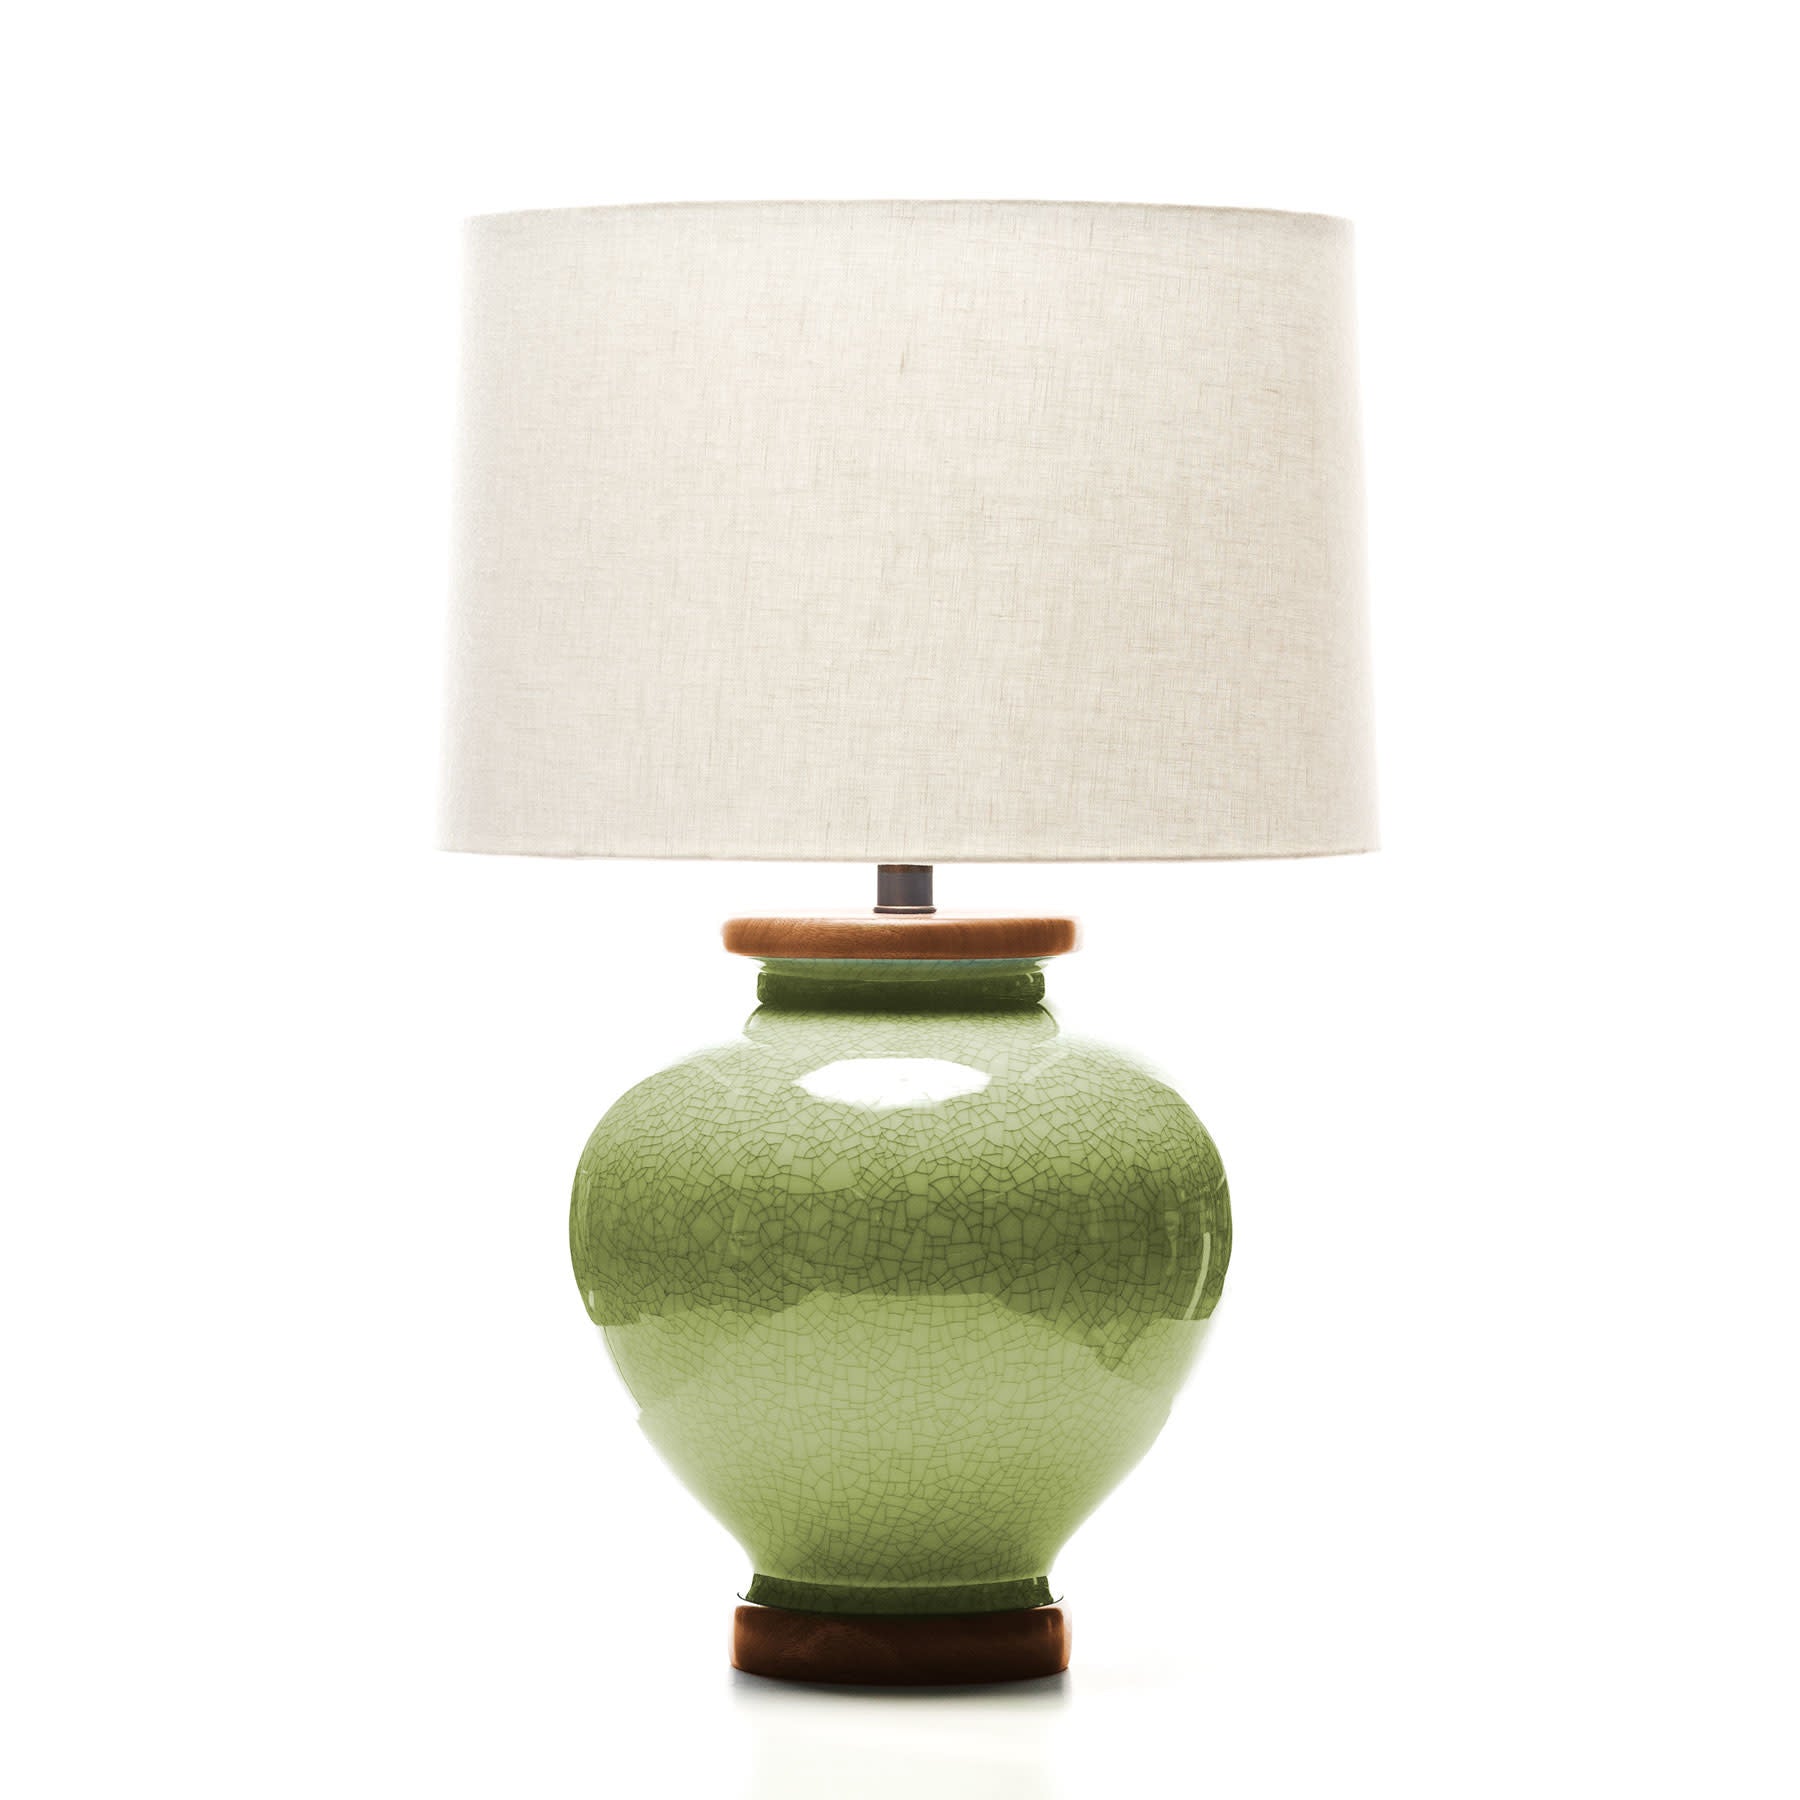 Luca Porcelain Lamp in Celadon Crackle with Sapele Base